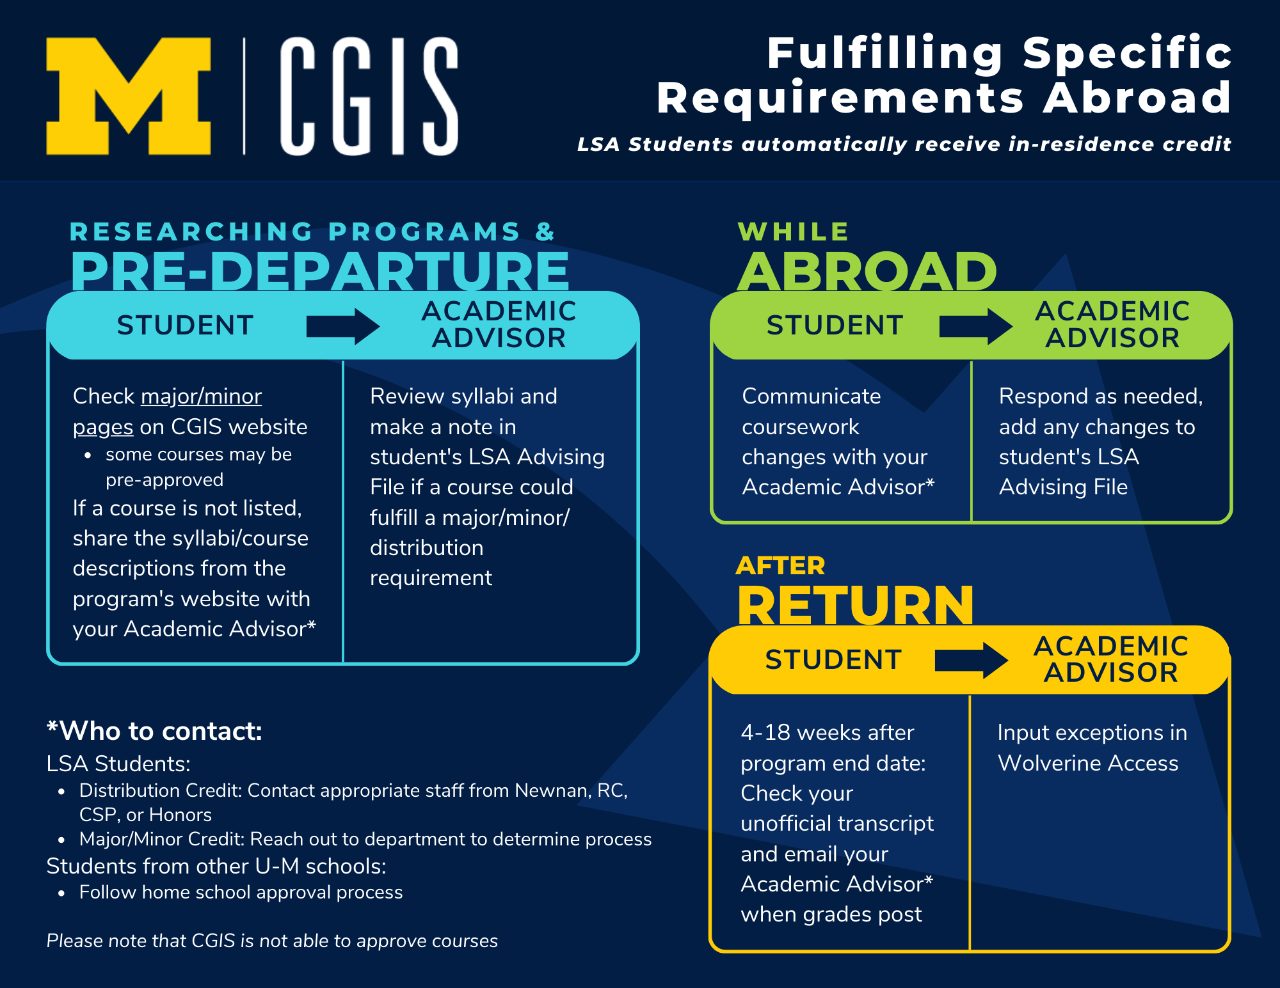 Image of graphic that explains the process of fulfilling specific requirements abroad, including details about what a student and an academic advisor should do before, while, and after the student is abroad. The image is linked to an accessible PDF version.